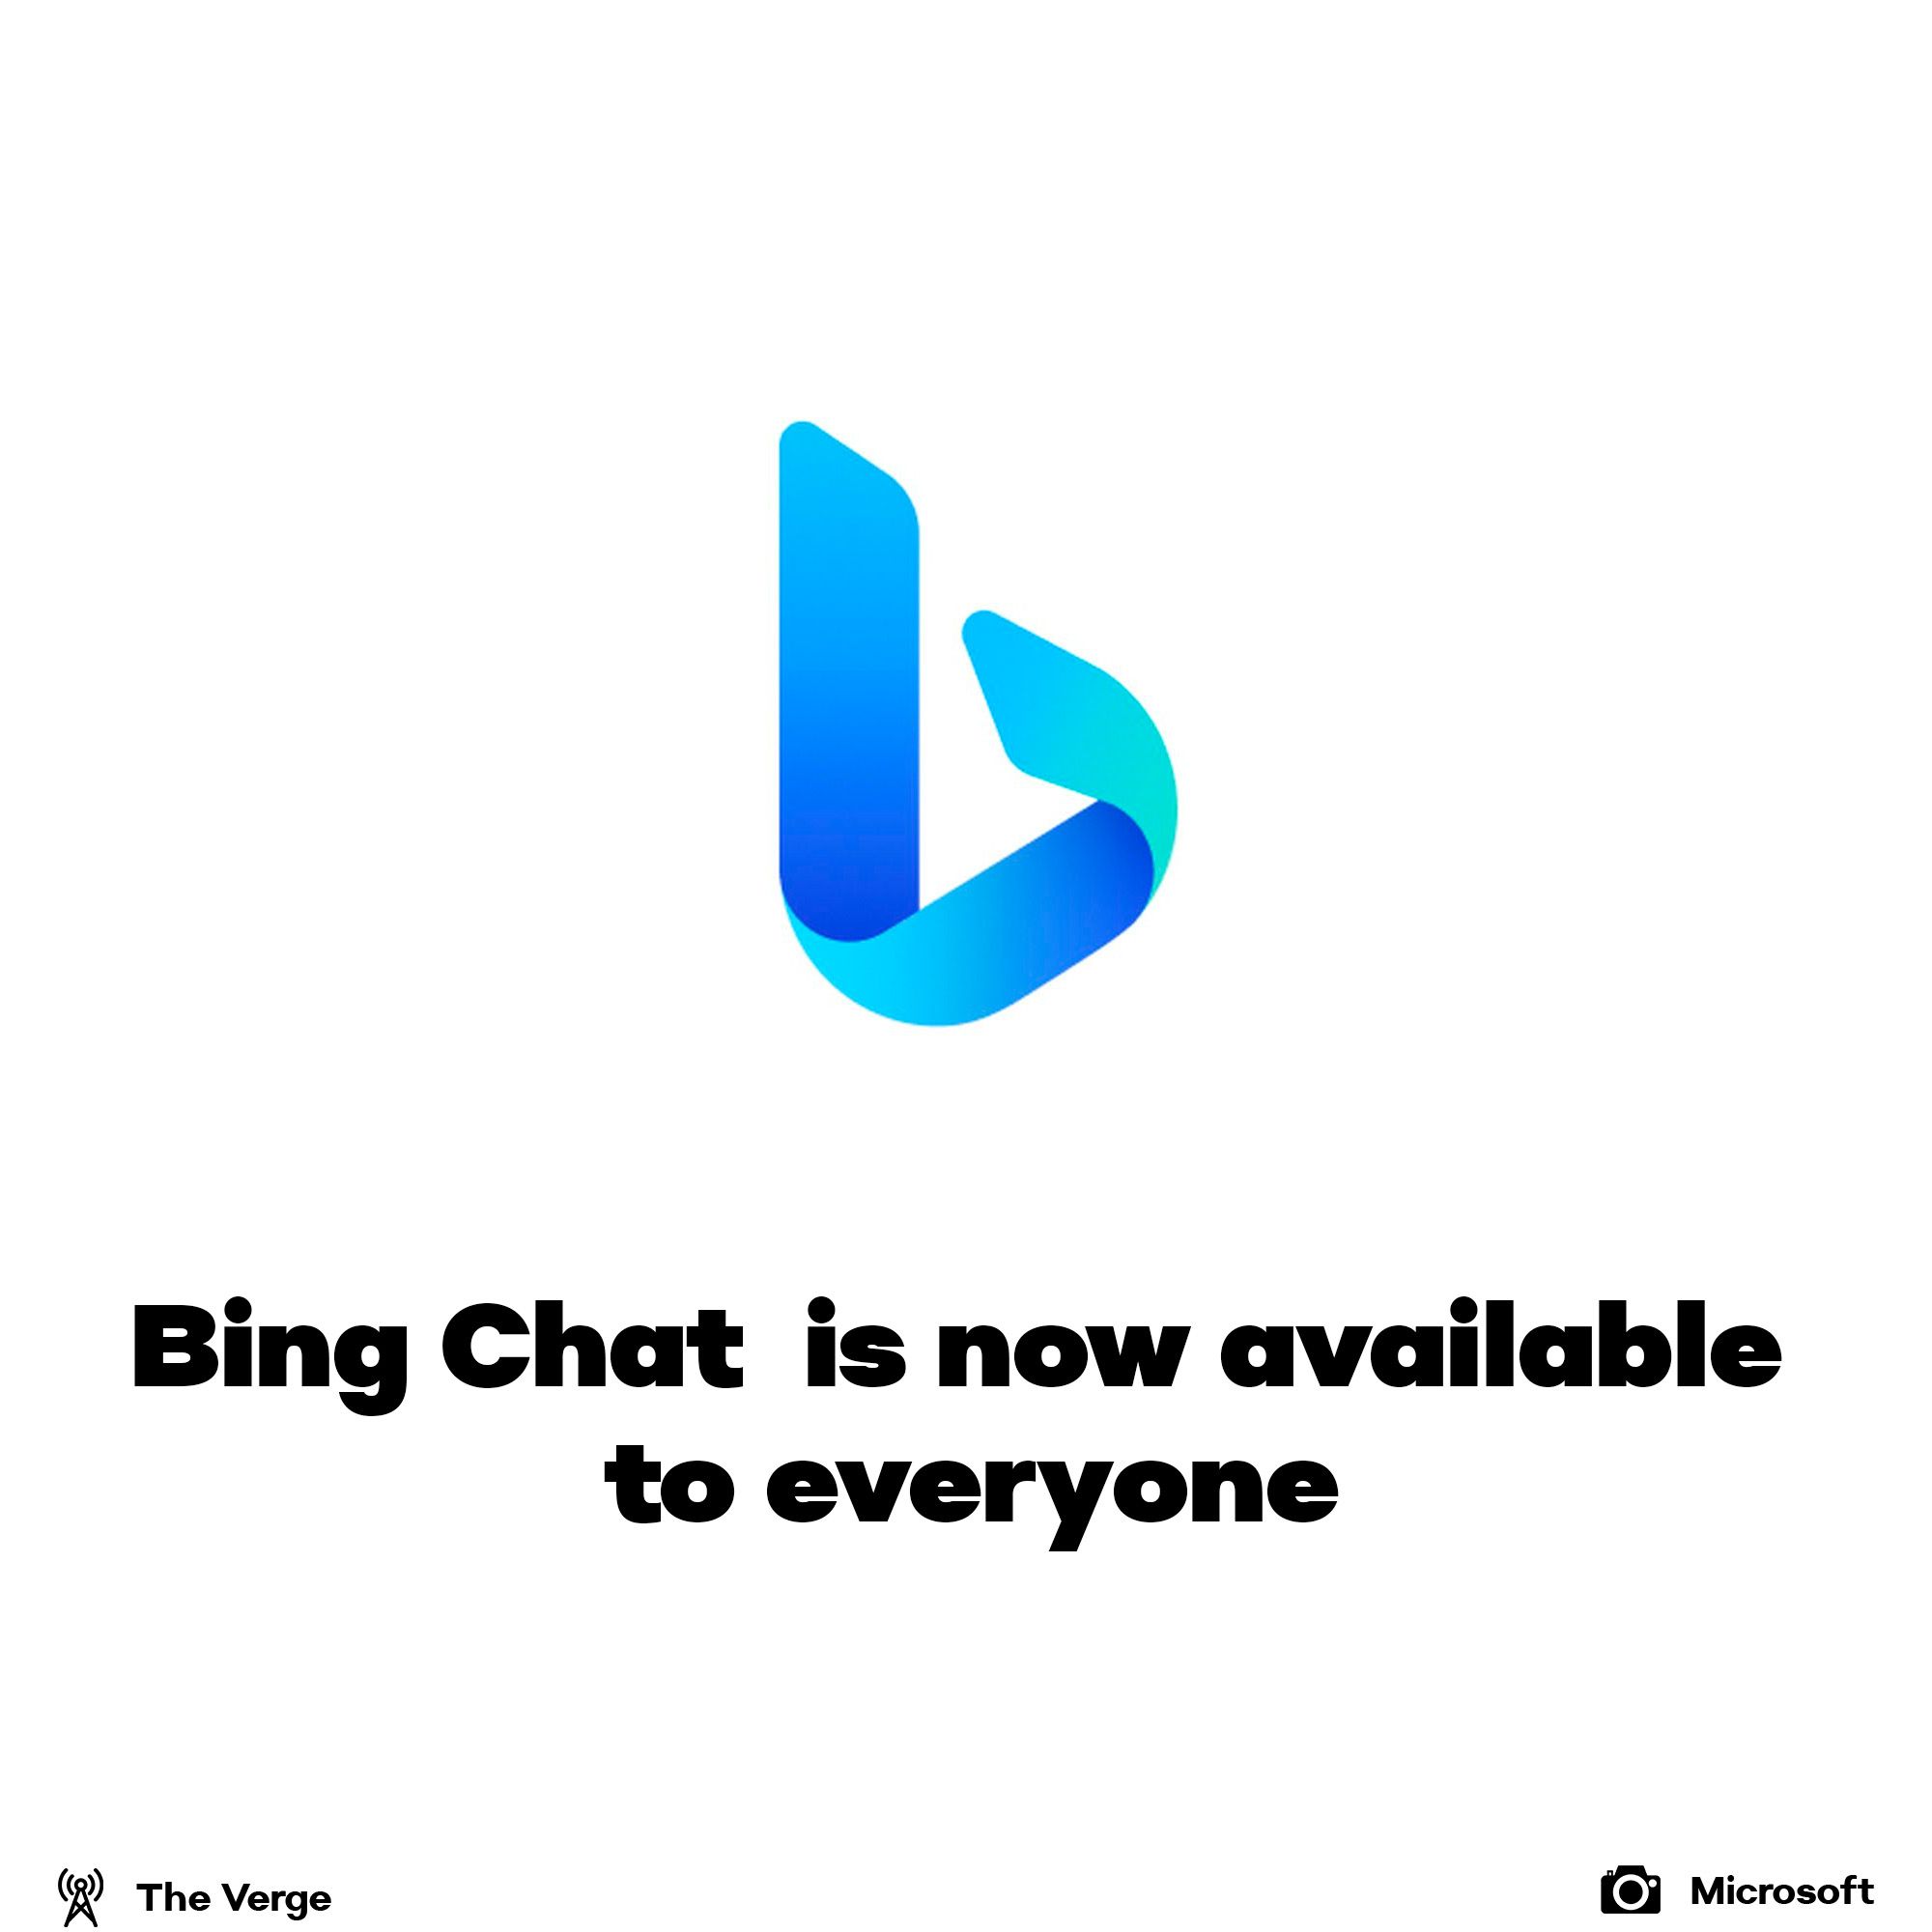 Bing ChatGTP is available to everyone